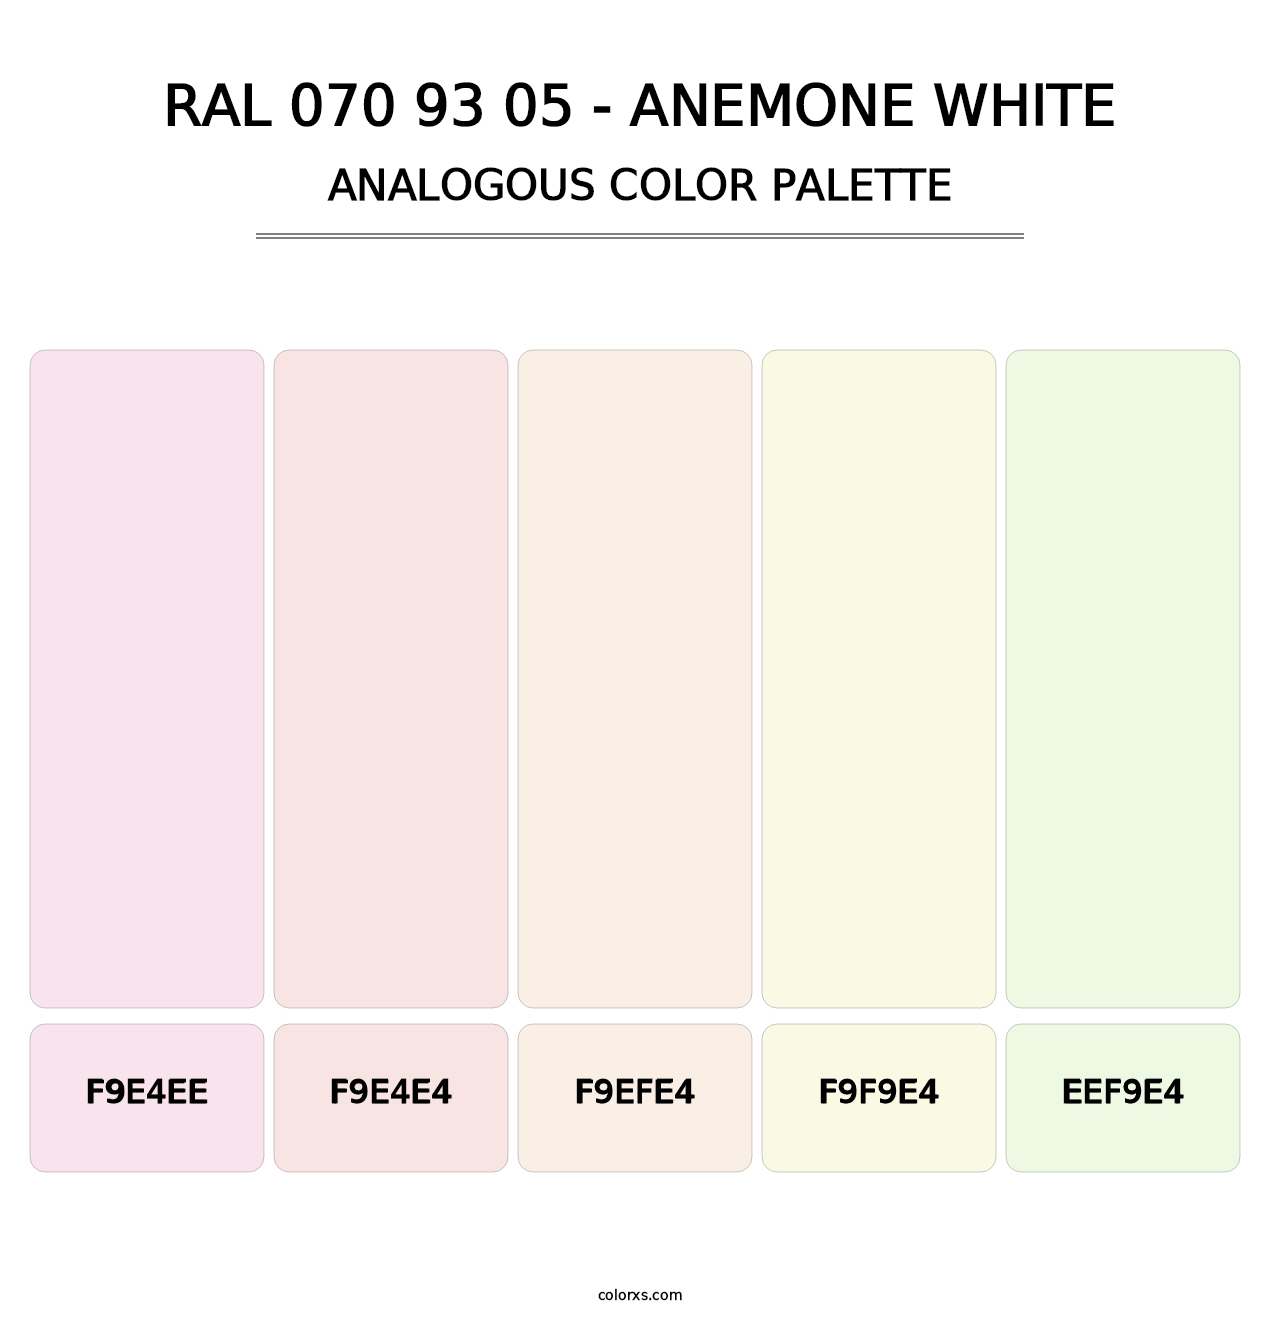 RAL 070 93 05 - Anemone White - Analogous Color Palette